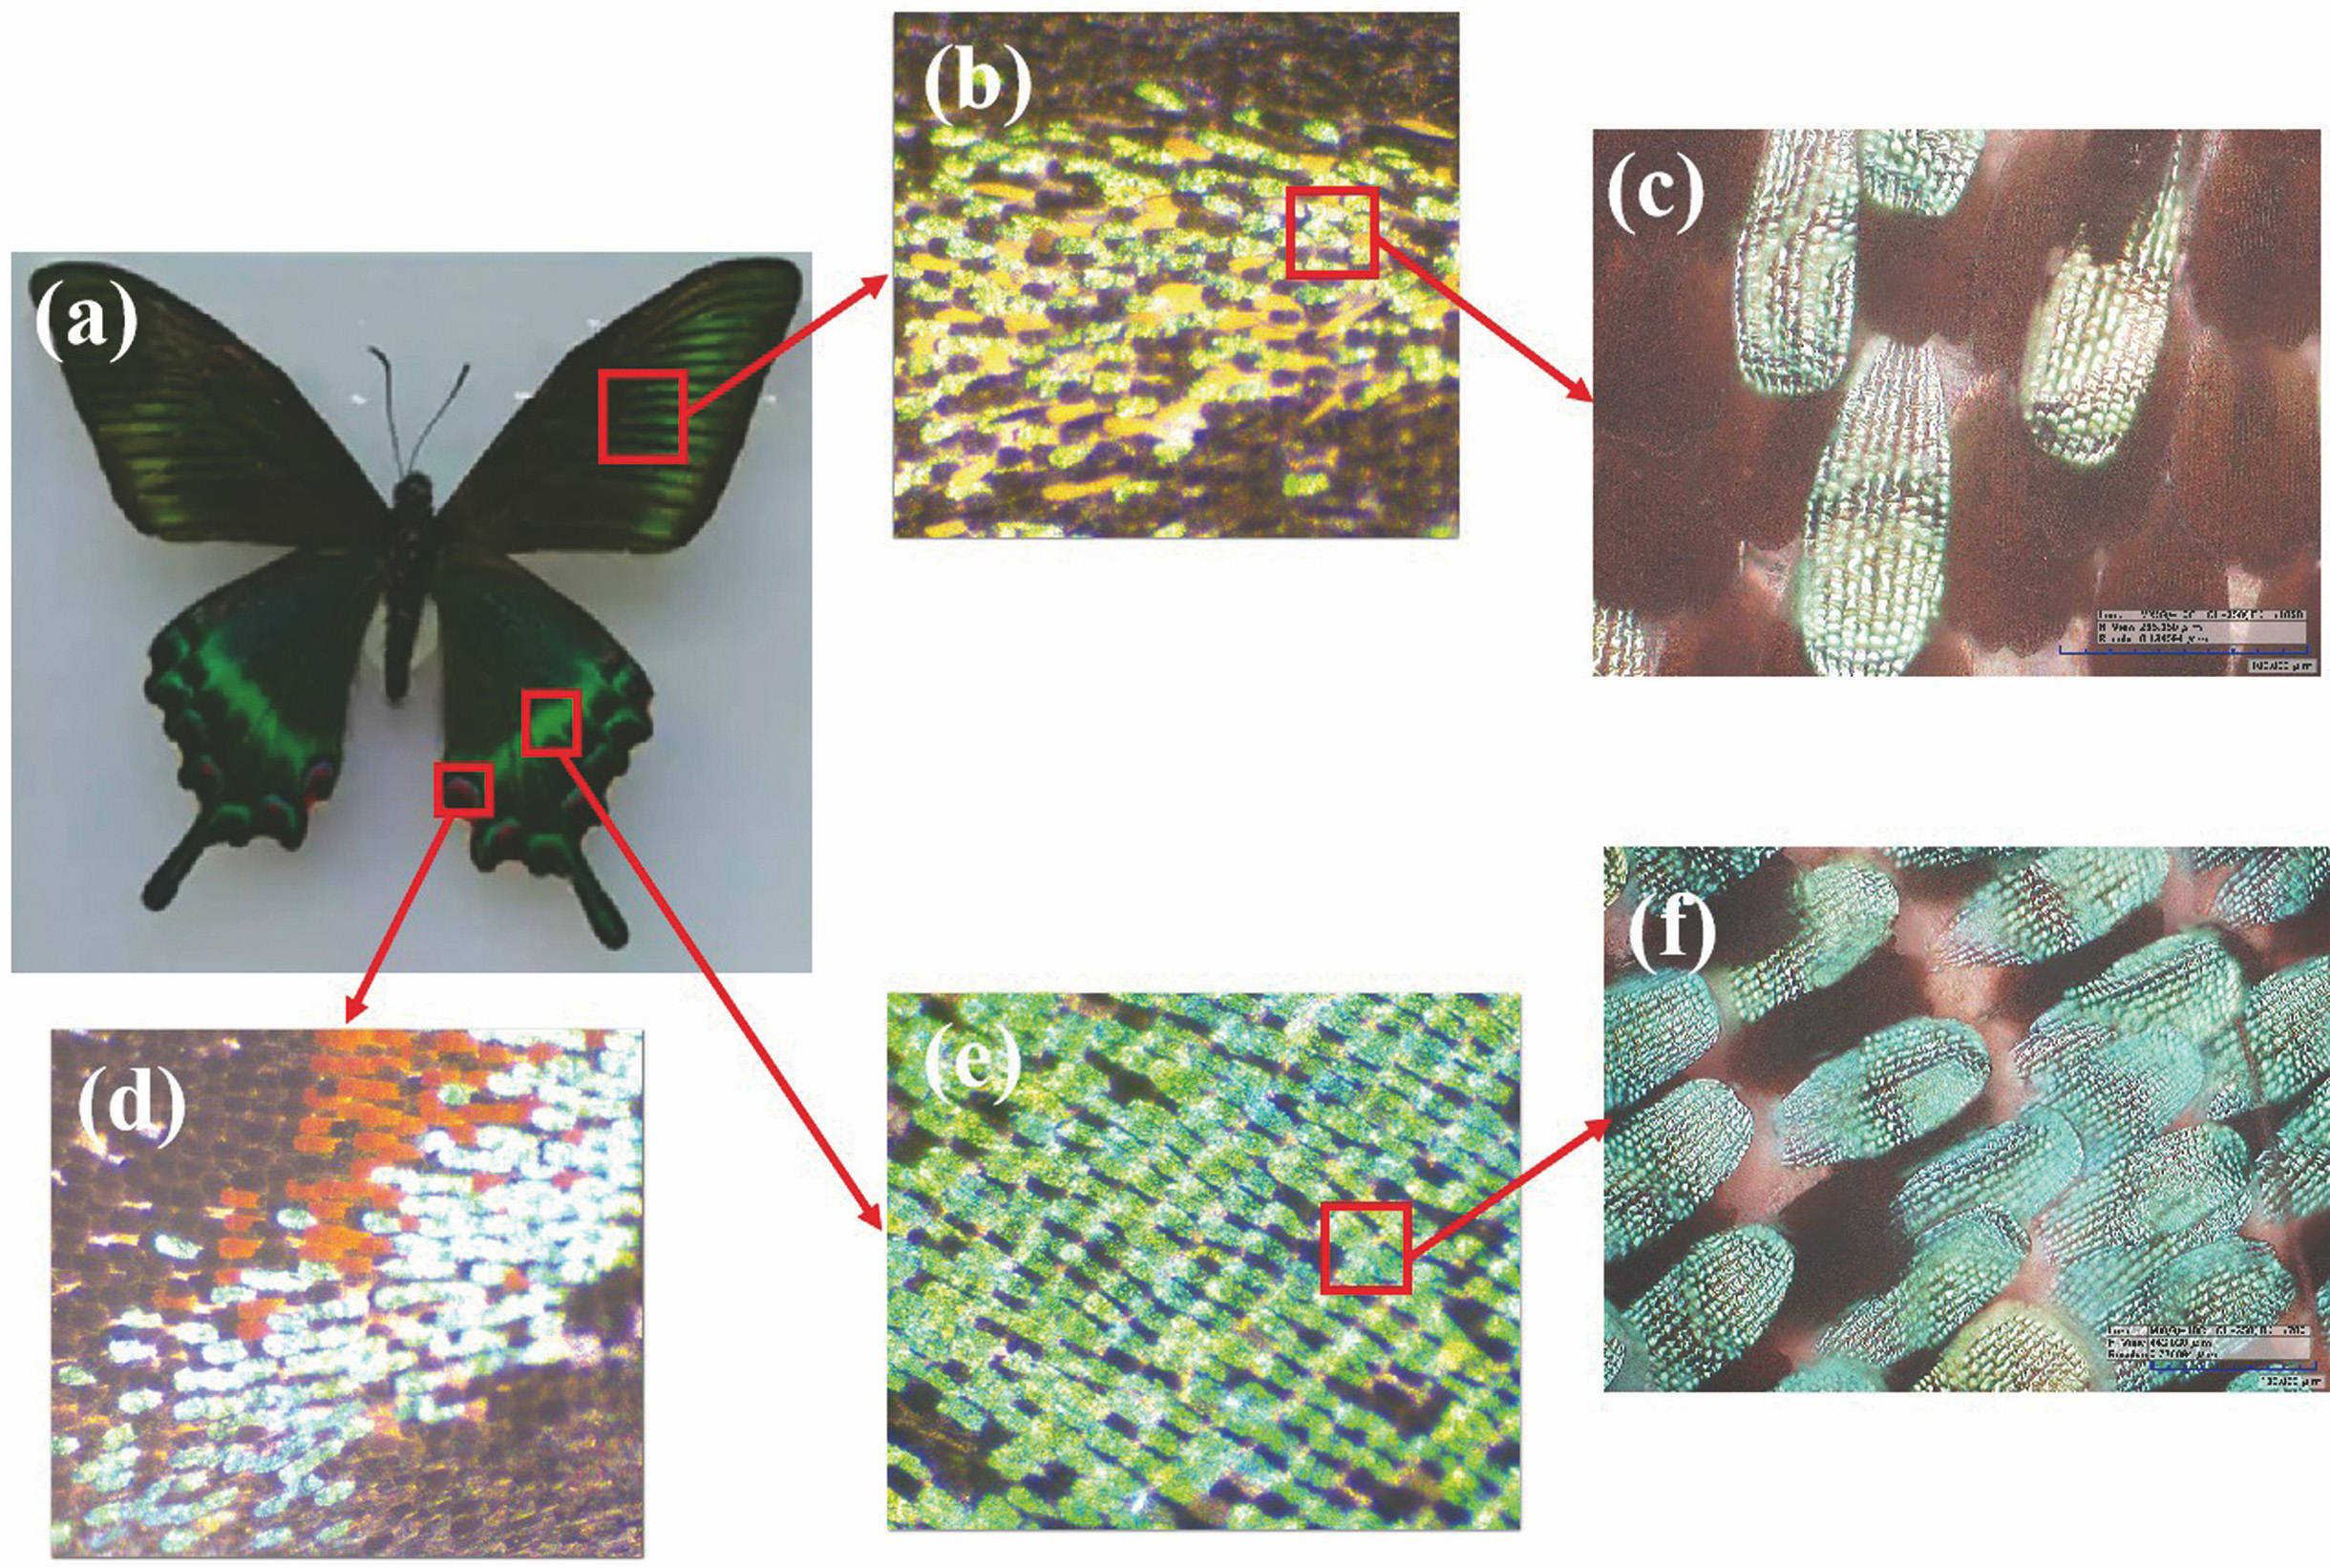 Optical microscopic images of the Achillidesbianor Cramer scales. (a) Achillidesbianor Cramer; (b)--(c) colored scales of the forewing; (d)--(f) colored scales of the hindwing